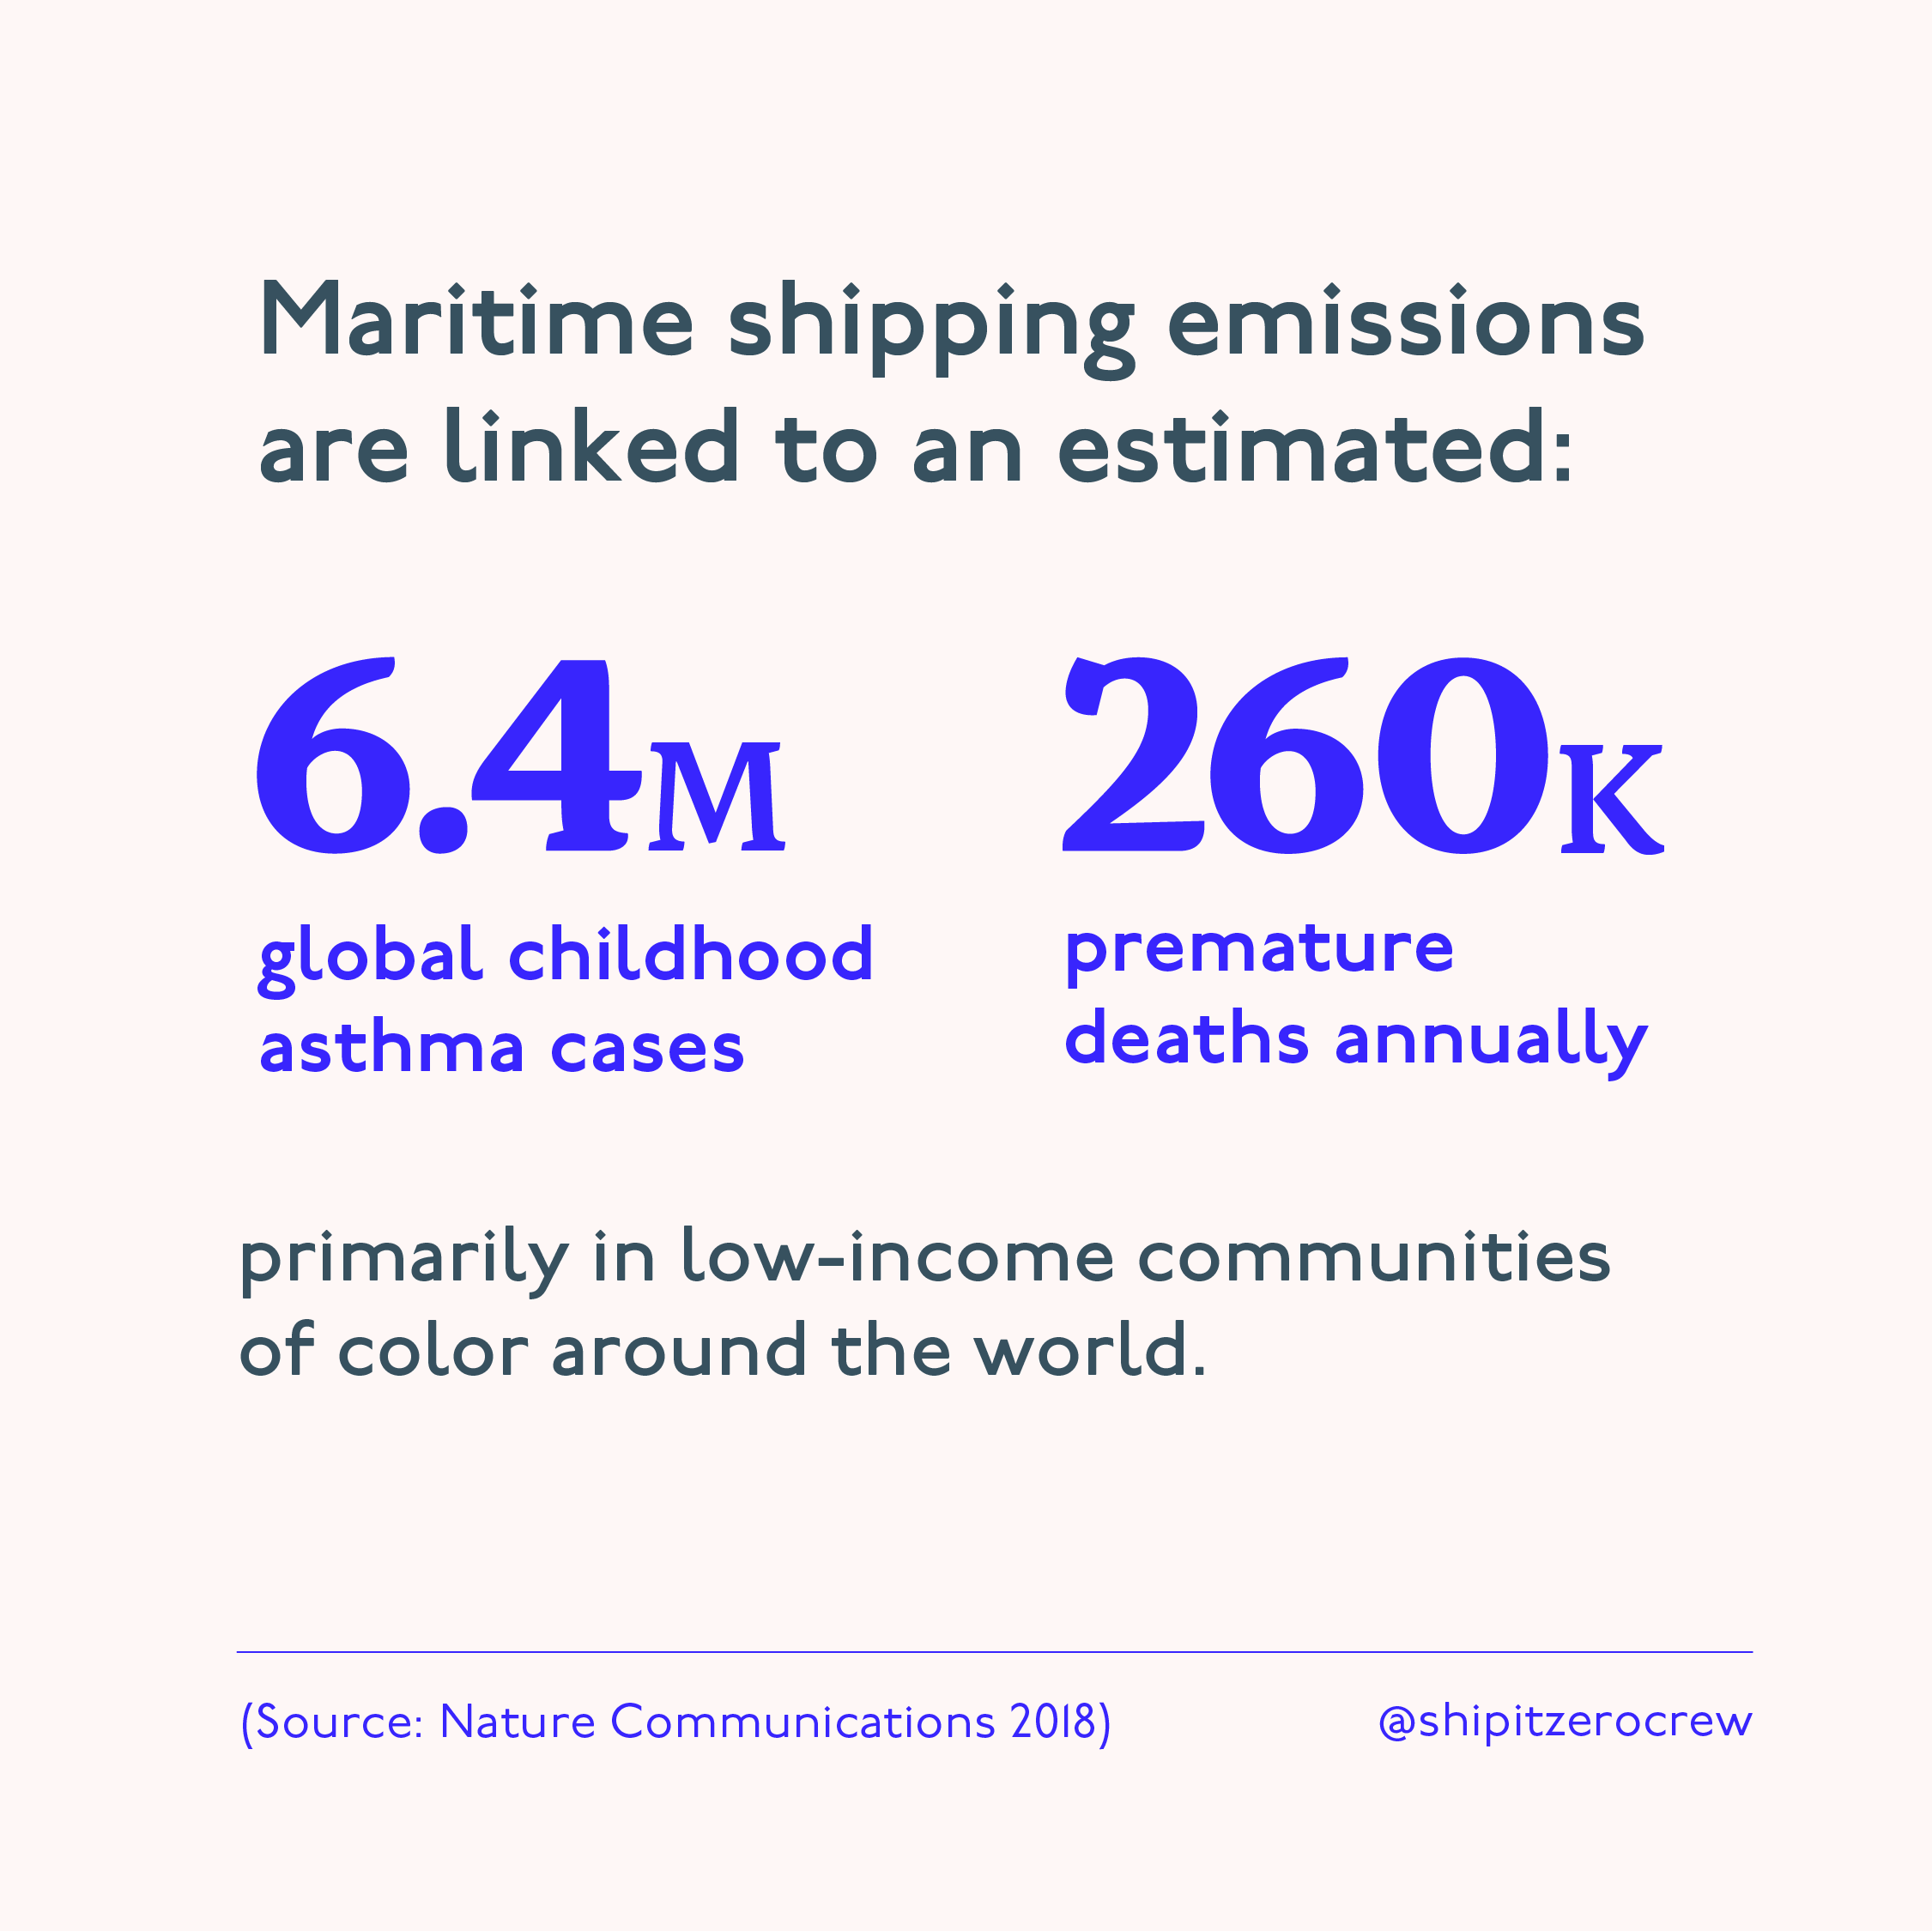 Graphic sharing the estimated link of maritime shipping emissions to childhood asthma cases and premature deaths